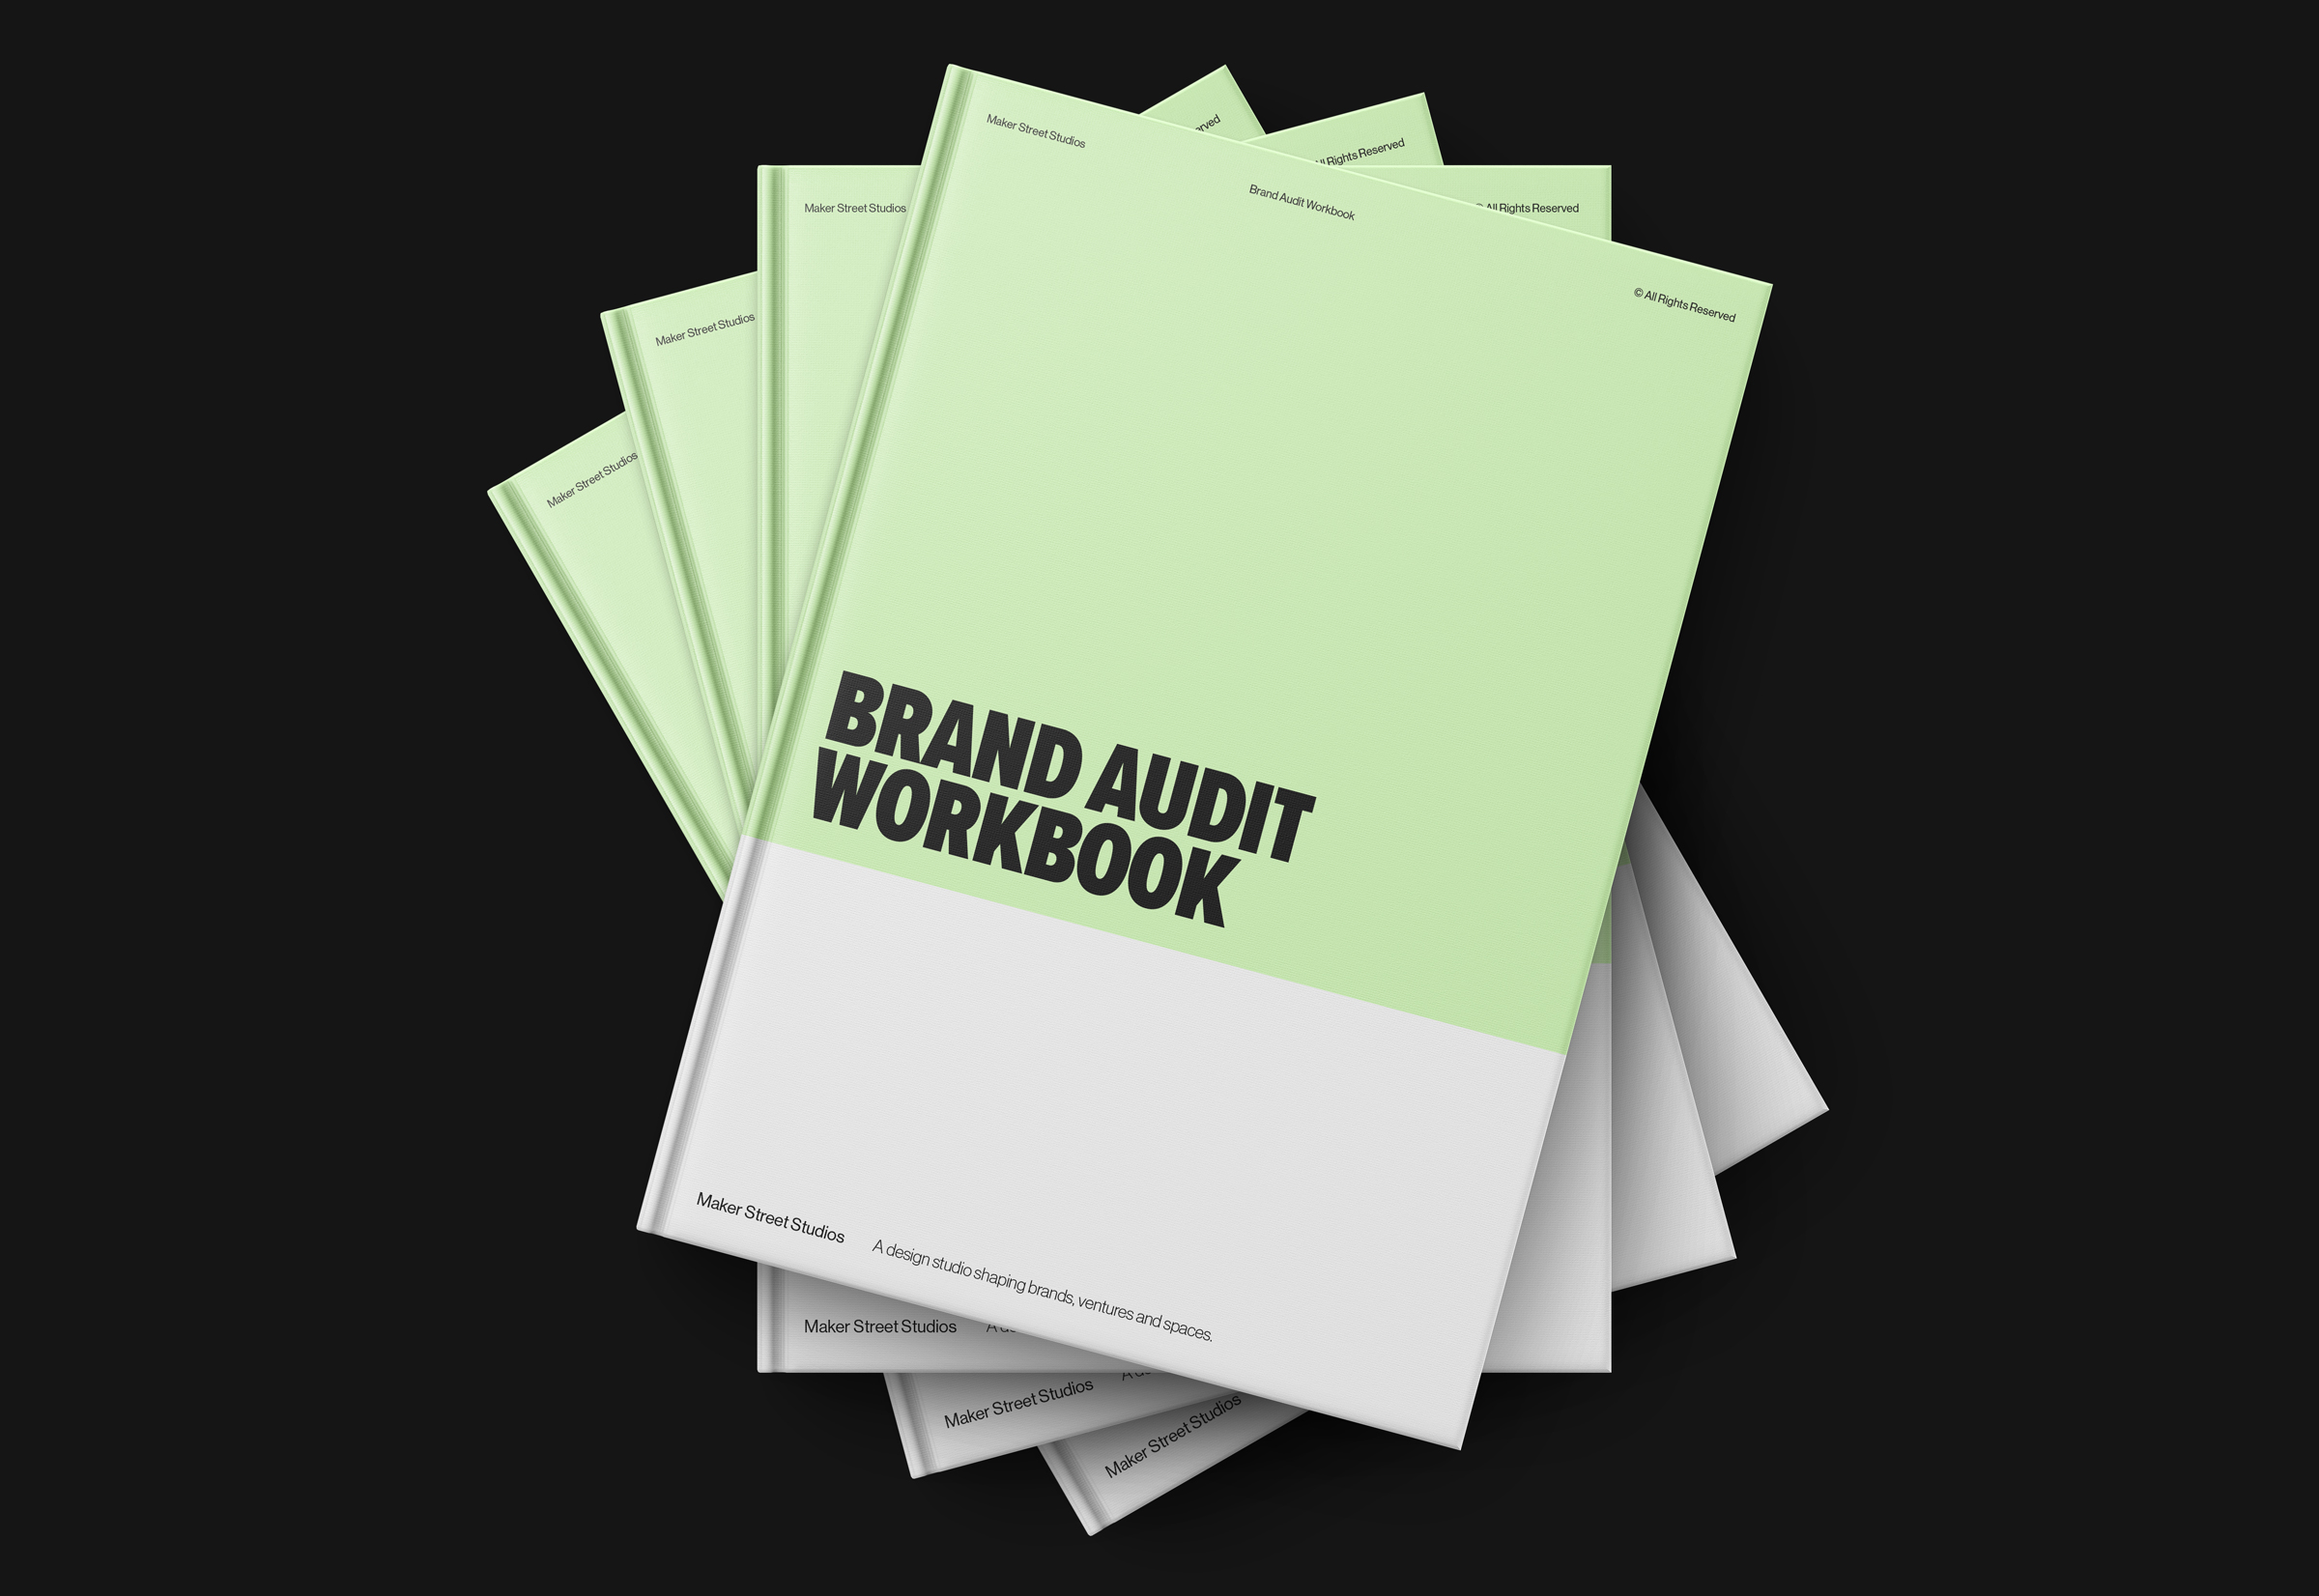 Brand Audit Workbook written by Maker Street Studios to help strengthen your brand and your business